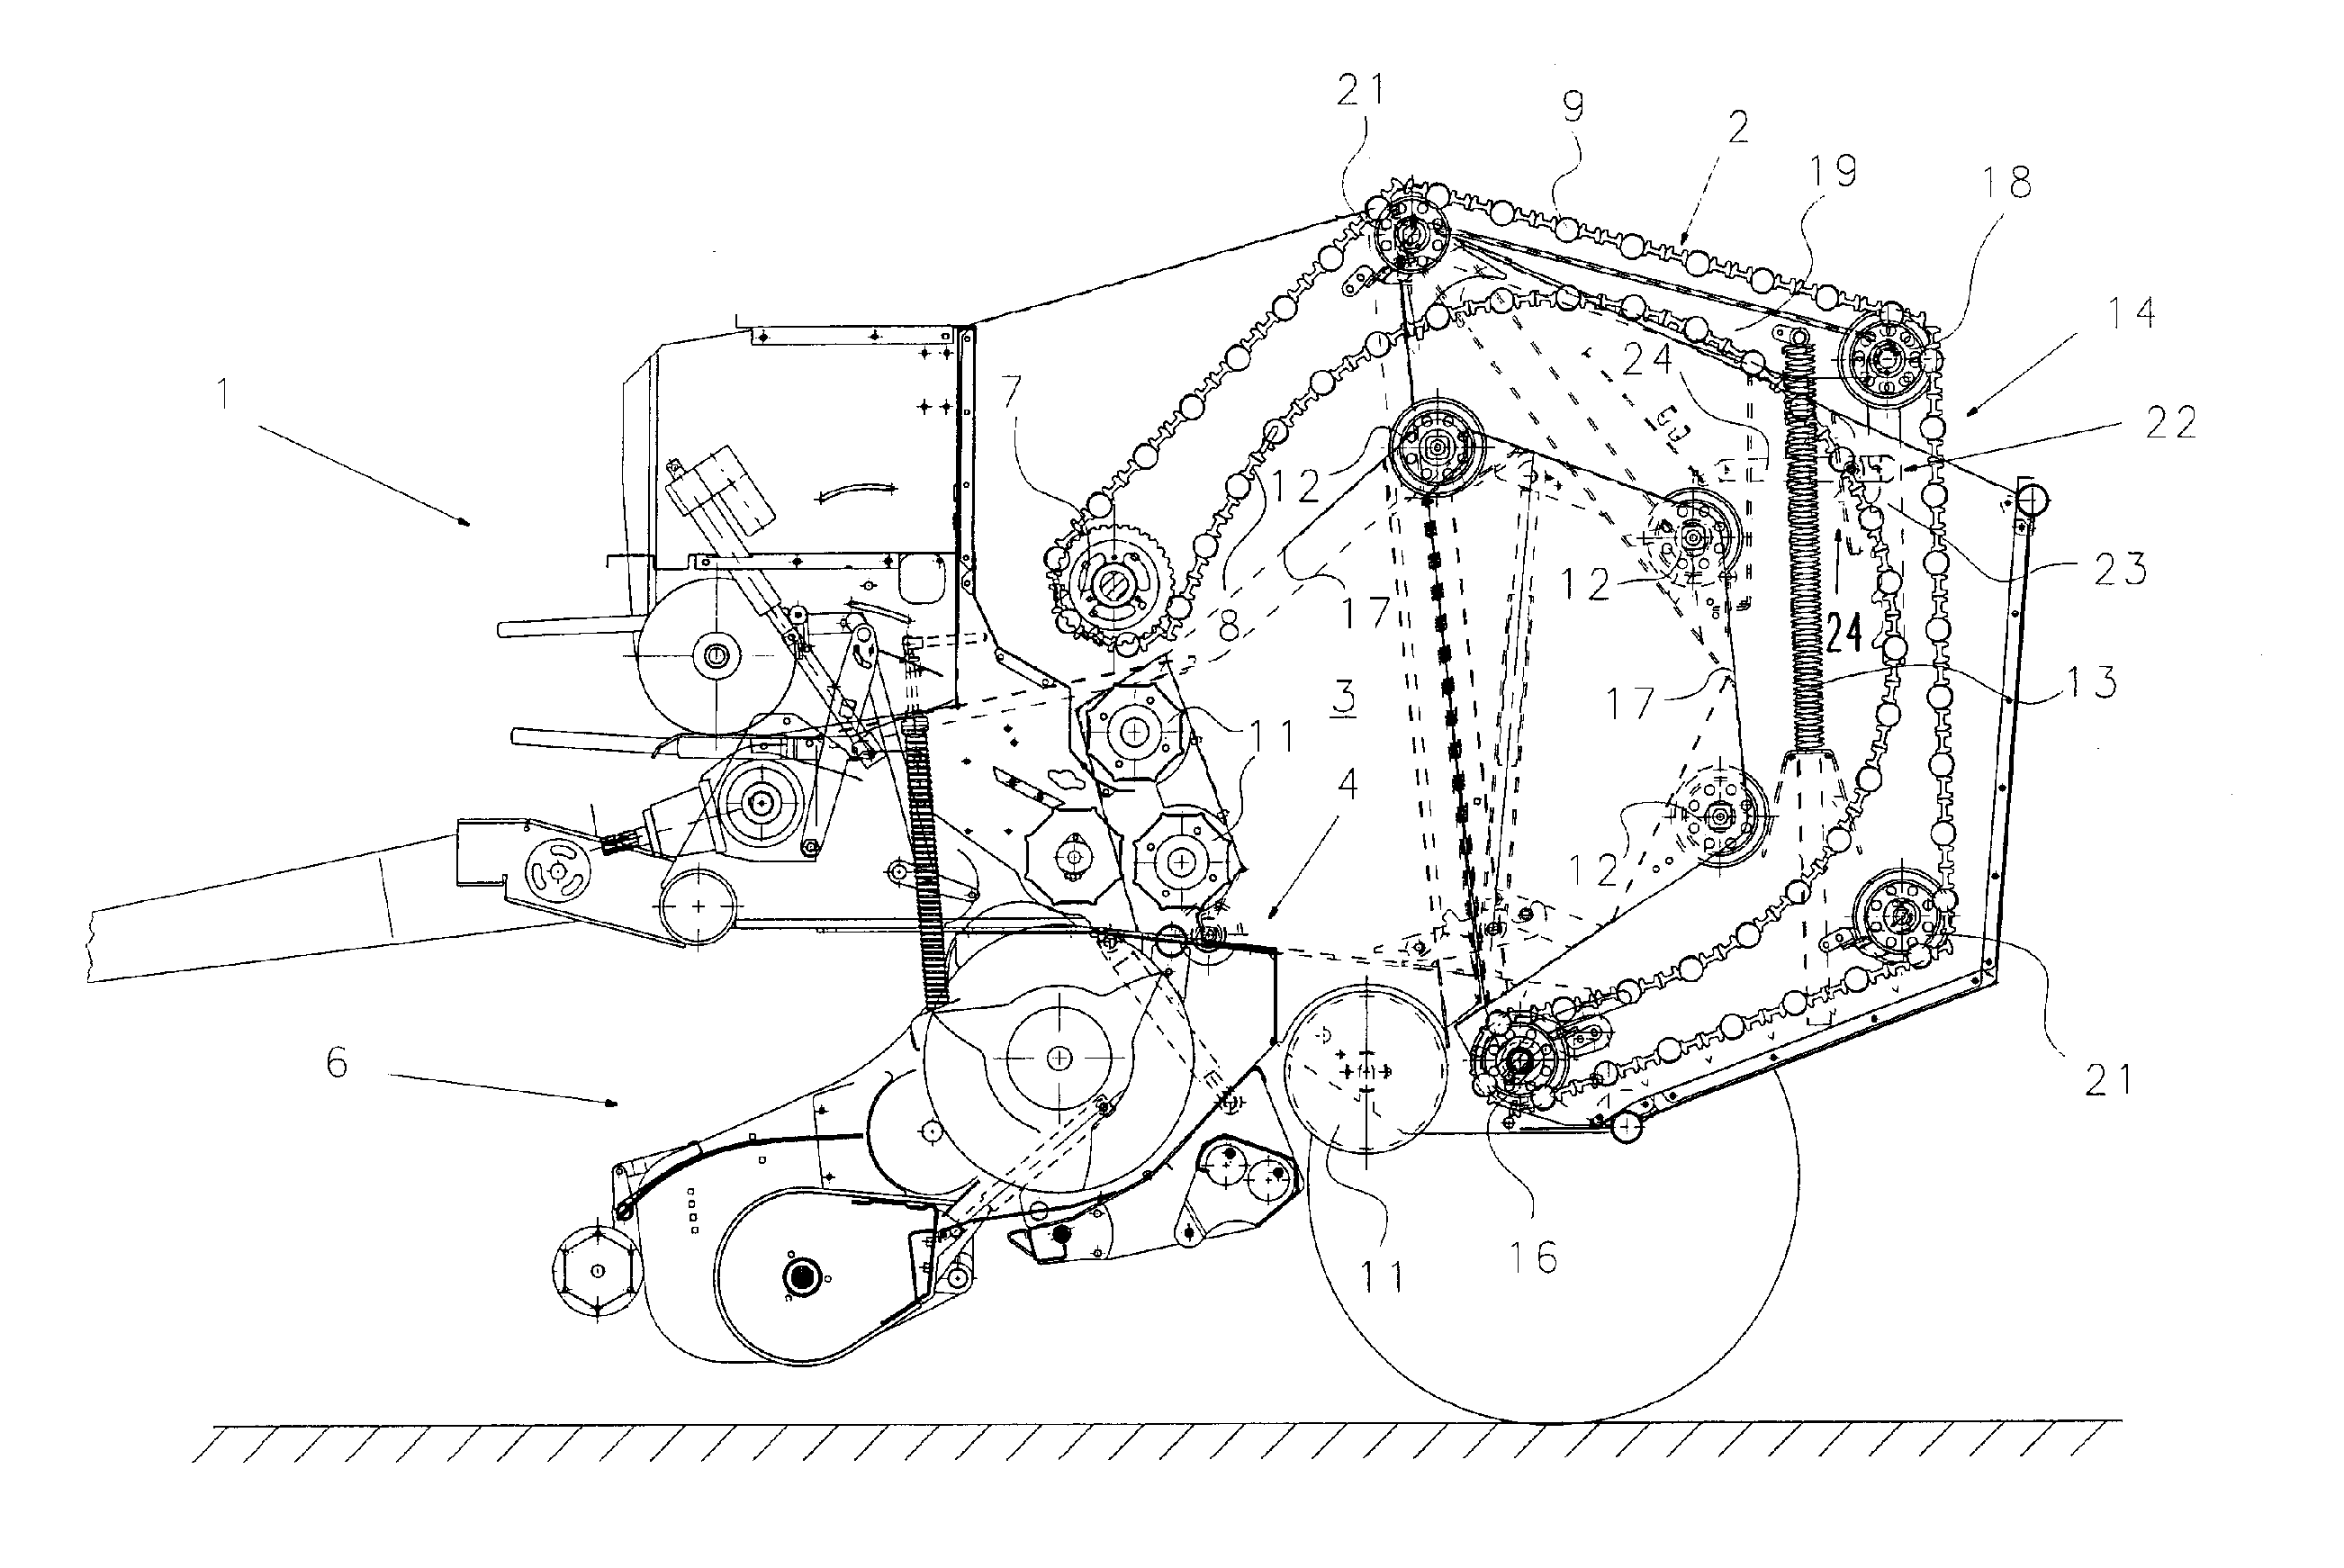 Machine for Collecting and Pressing an Agricultural Harvest